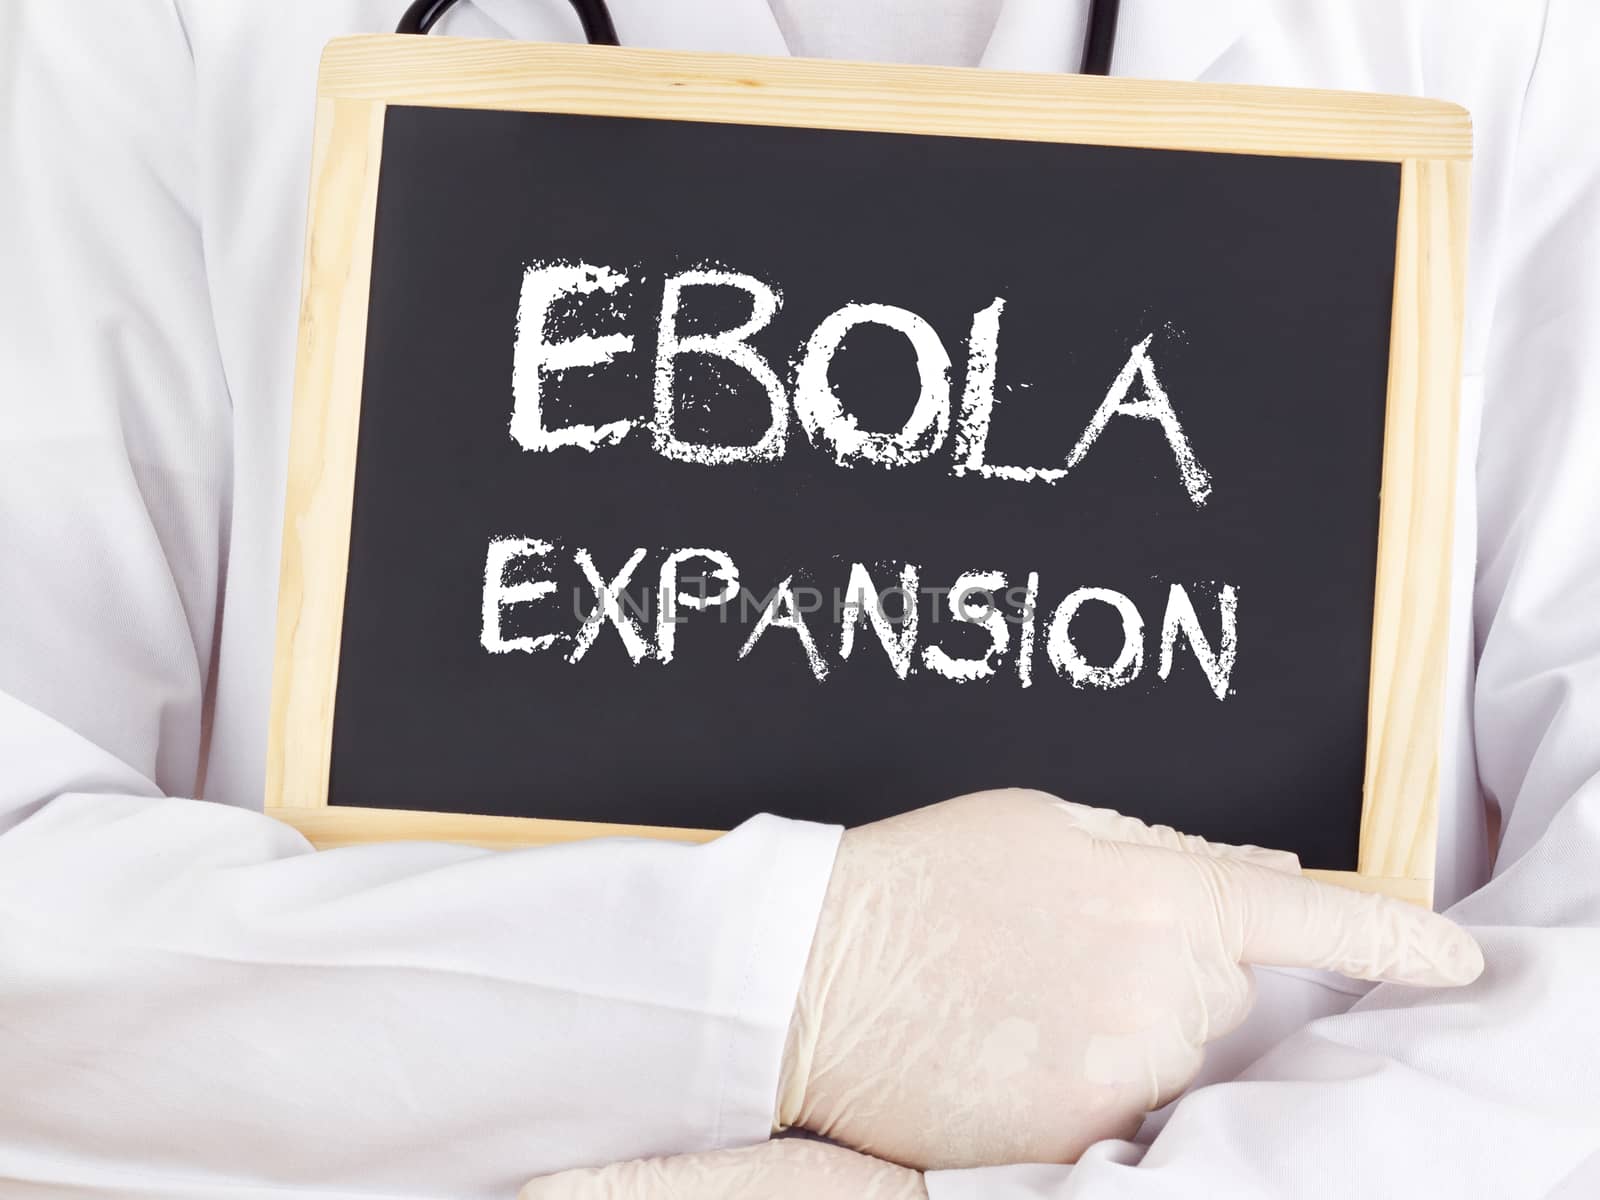 Doctor shows information: Ebola expansion by gwolters